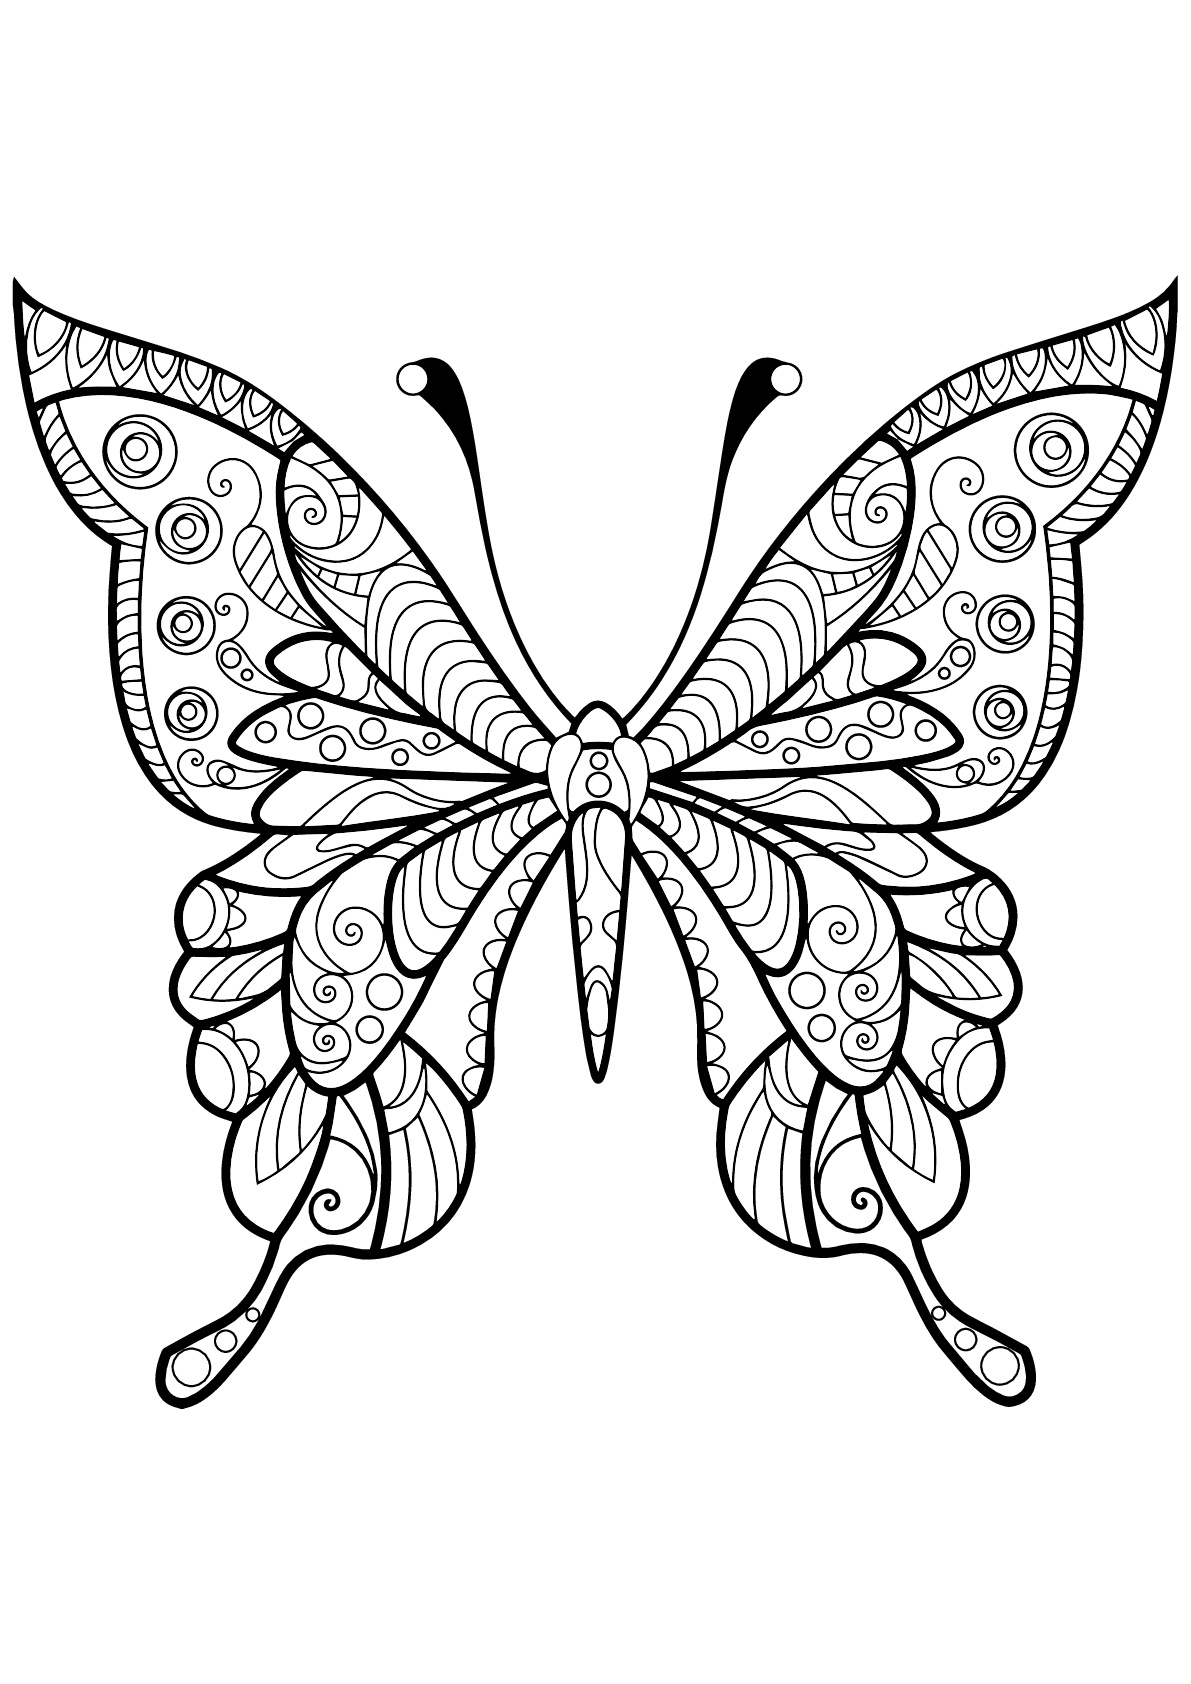 Butterfly beautiful patterns - 4 - Butterflies & insects Adult Coloring  Pages